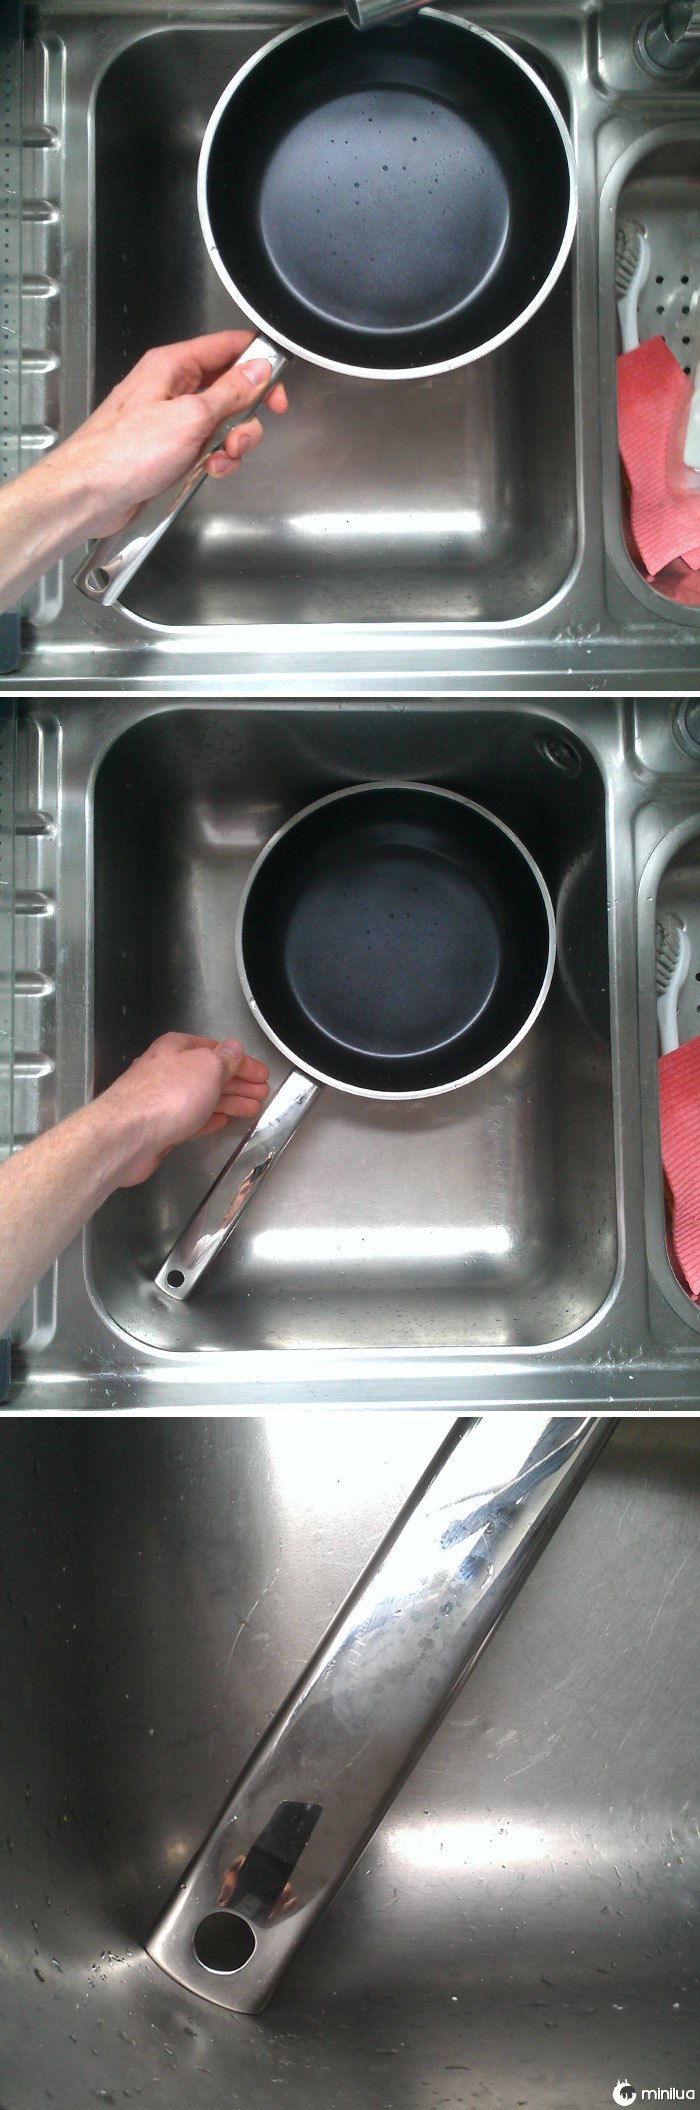 My Frying Pan Fits Perfectly Into My Sink